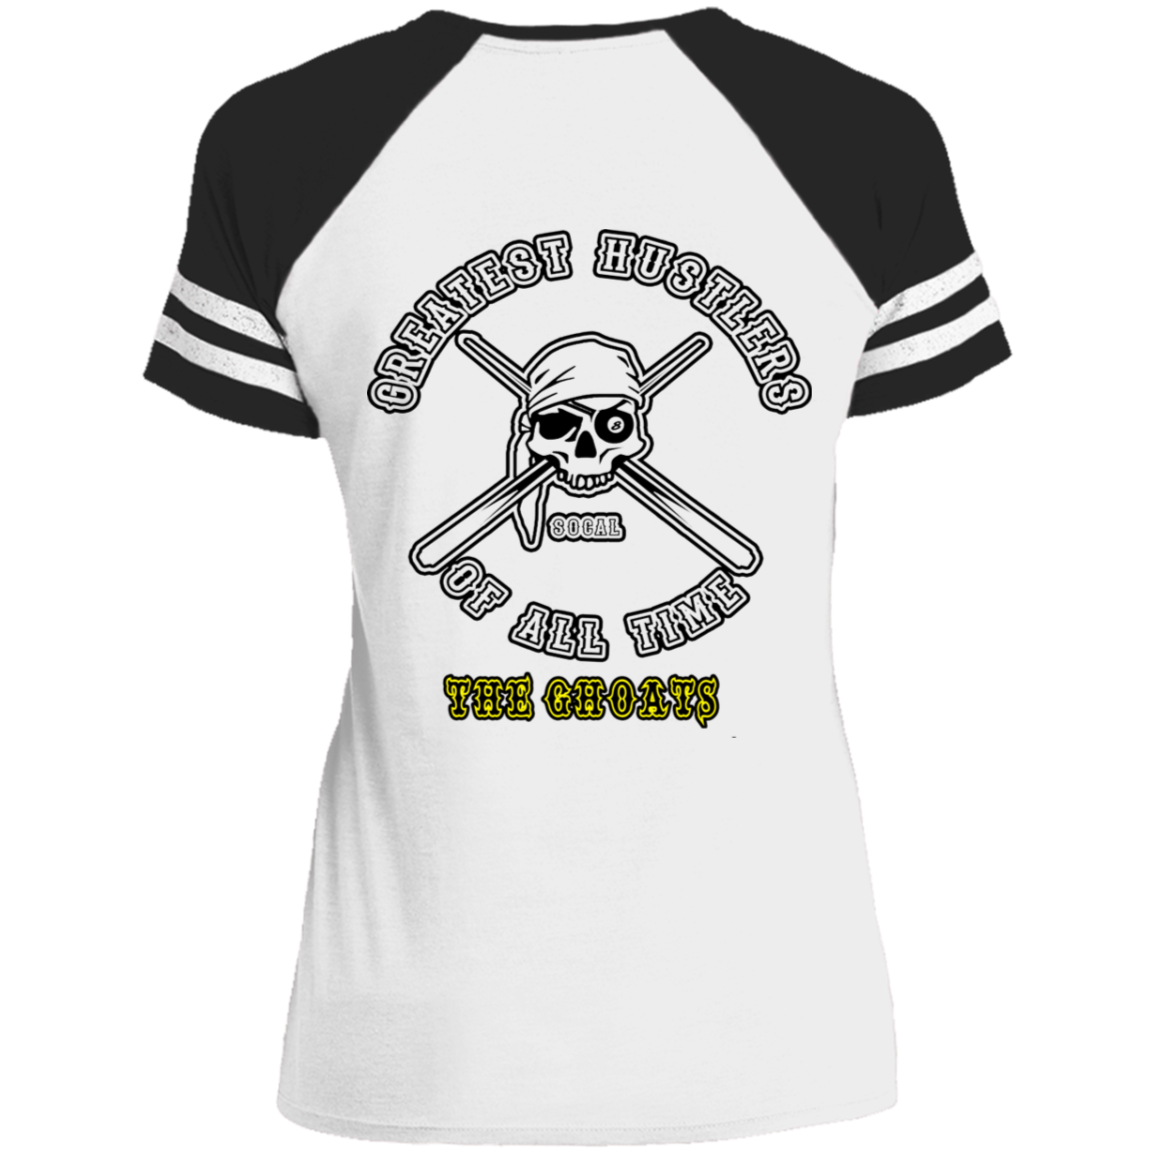 The GHOATS Custom Design. #4 Motorcycle Club Style. Ver 1/2. Ladies' Game V-Neck T-Shirt